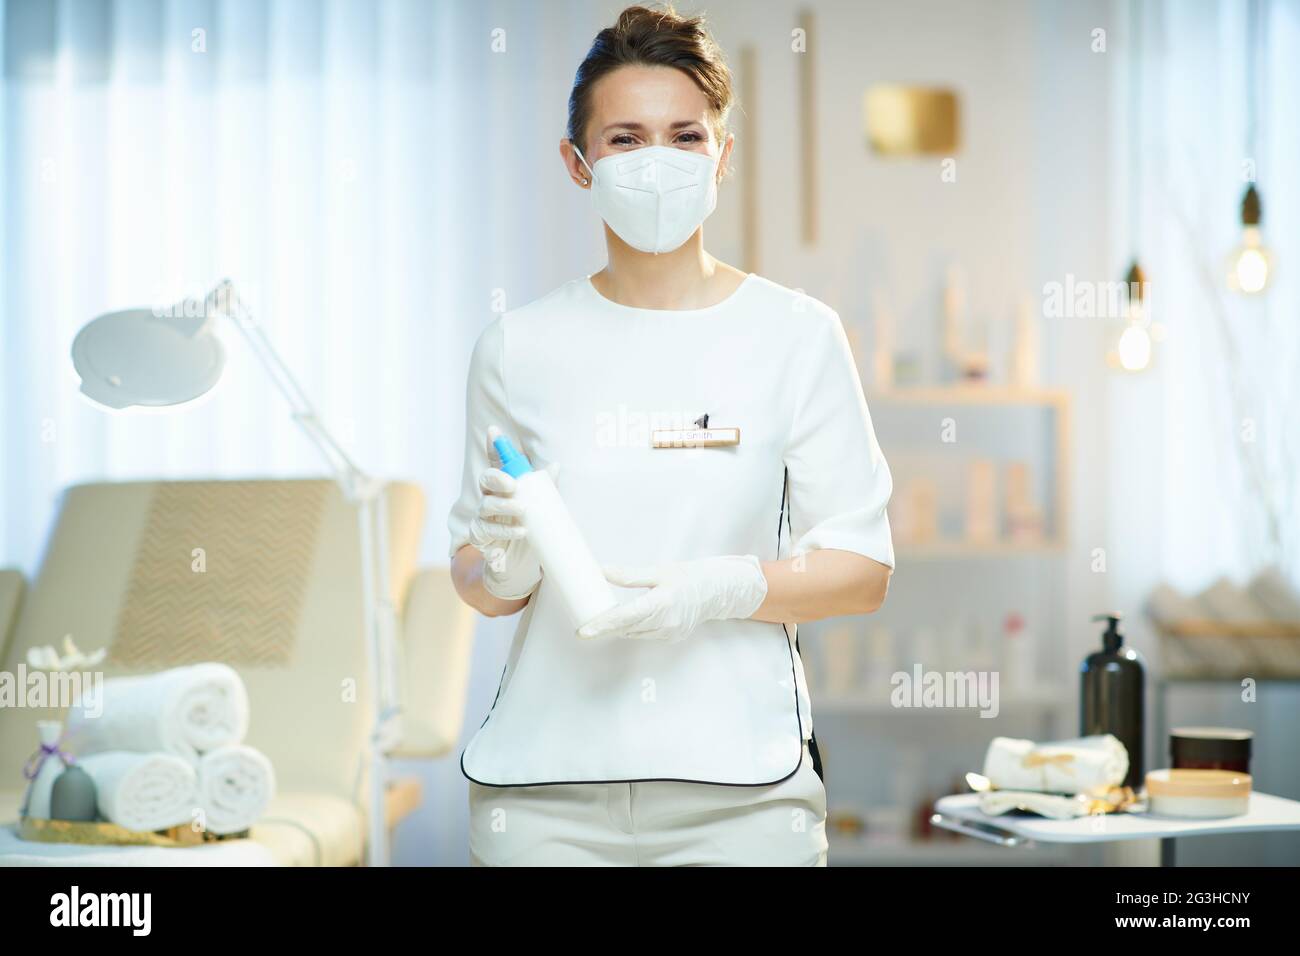 Business during coronavirus pandemic. female worker with ffp2 mask and sanitizer in modern beauty salon. Stock Photo